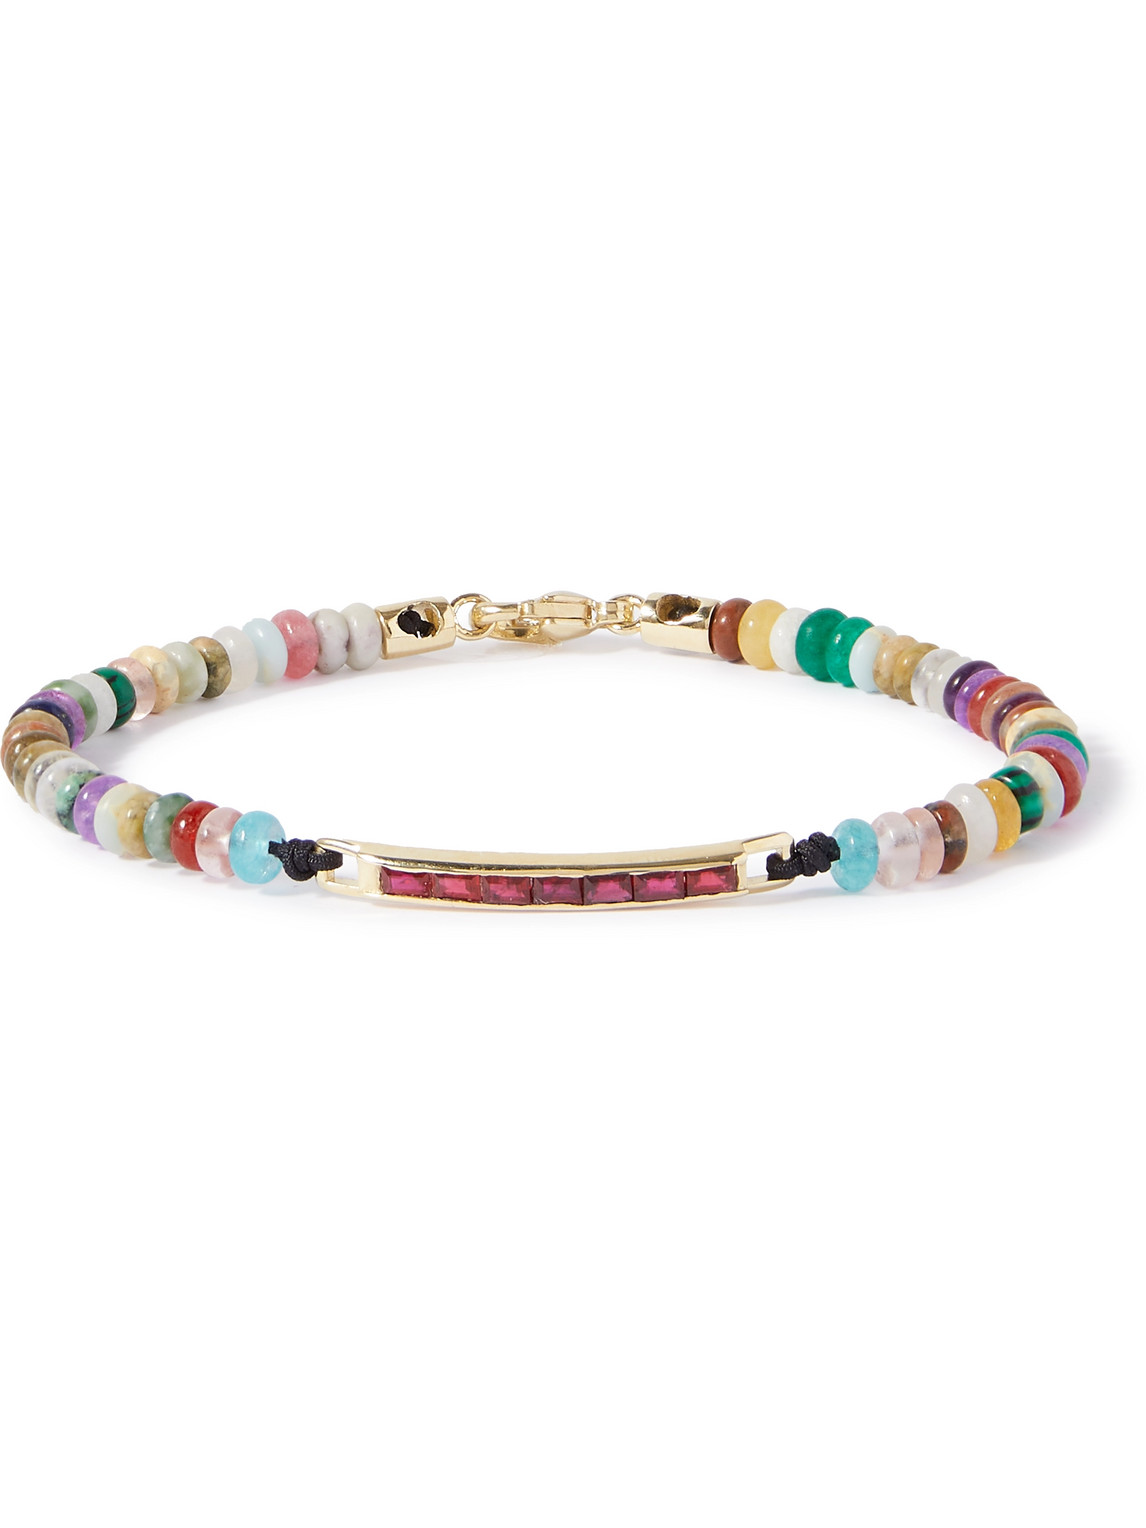 Luis Morais Gold, Ruby And Agate Beaded Bracelet In Multi